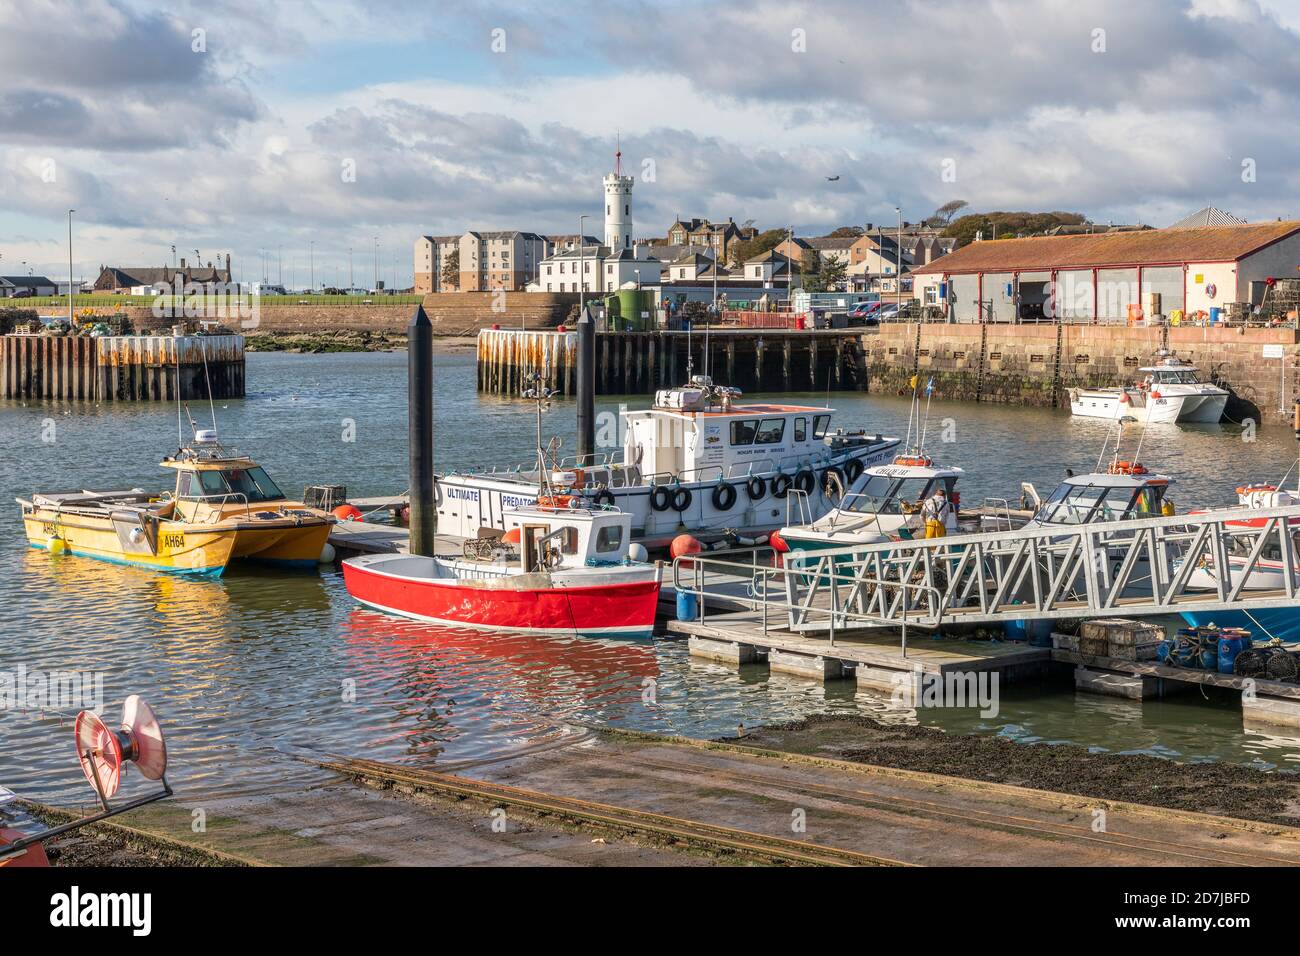 Small boats, fishing boats and pier at Arbroath harbour, Arbroath, Angus, Scotland, UK Stock Photo